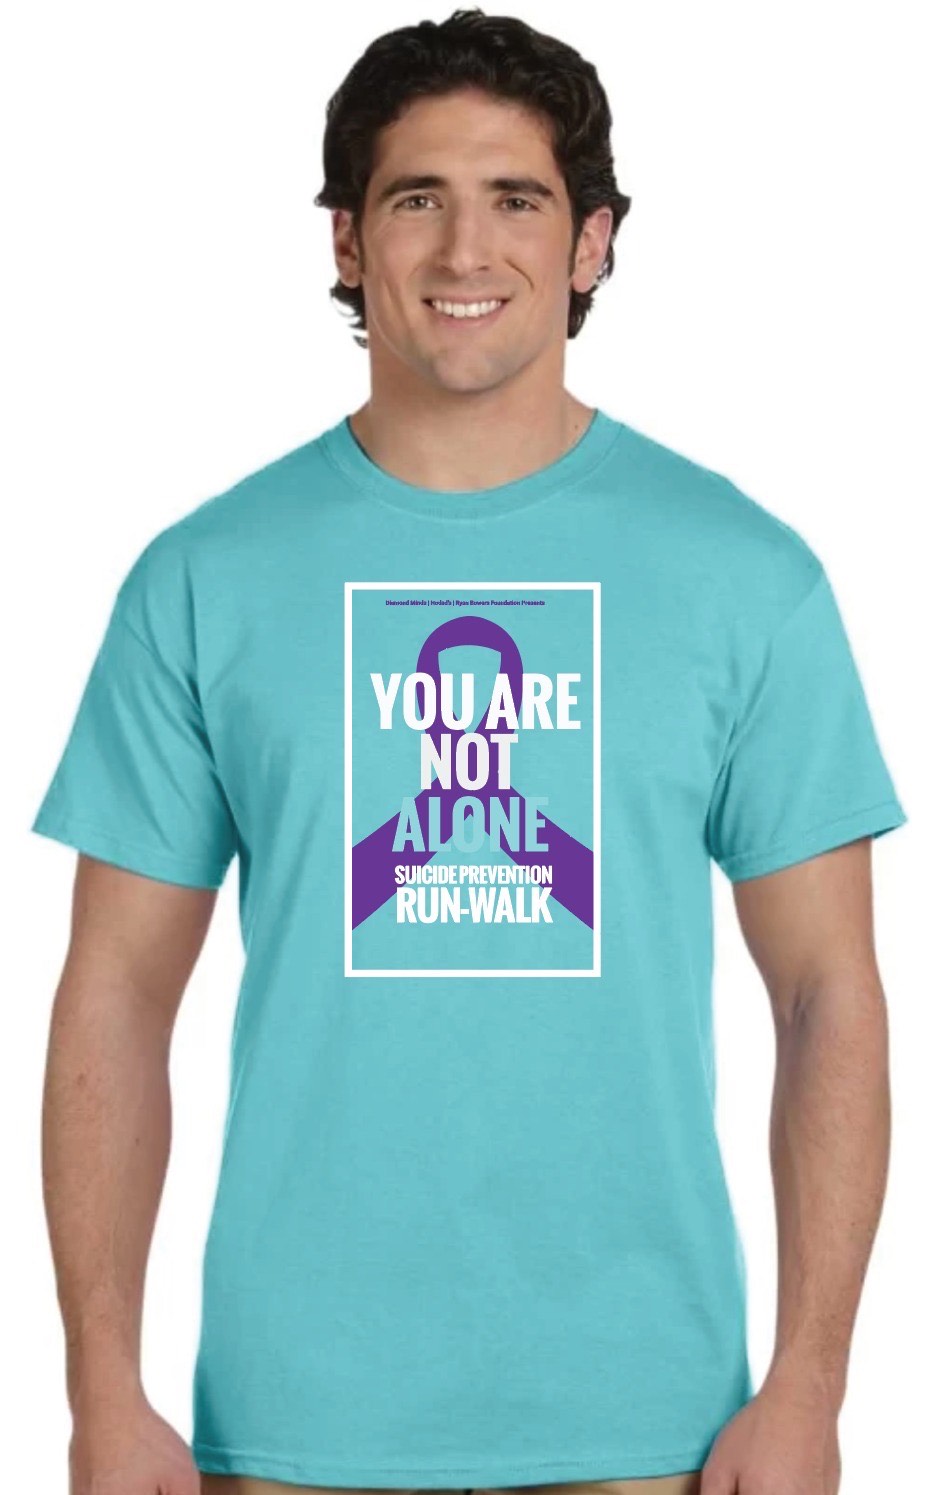 You are not alone Men's Tee